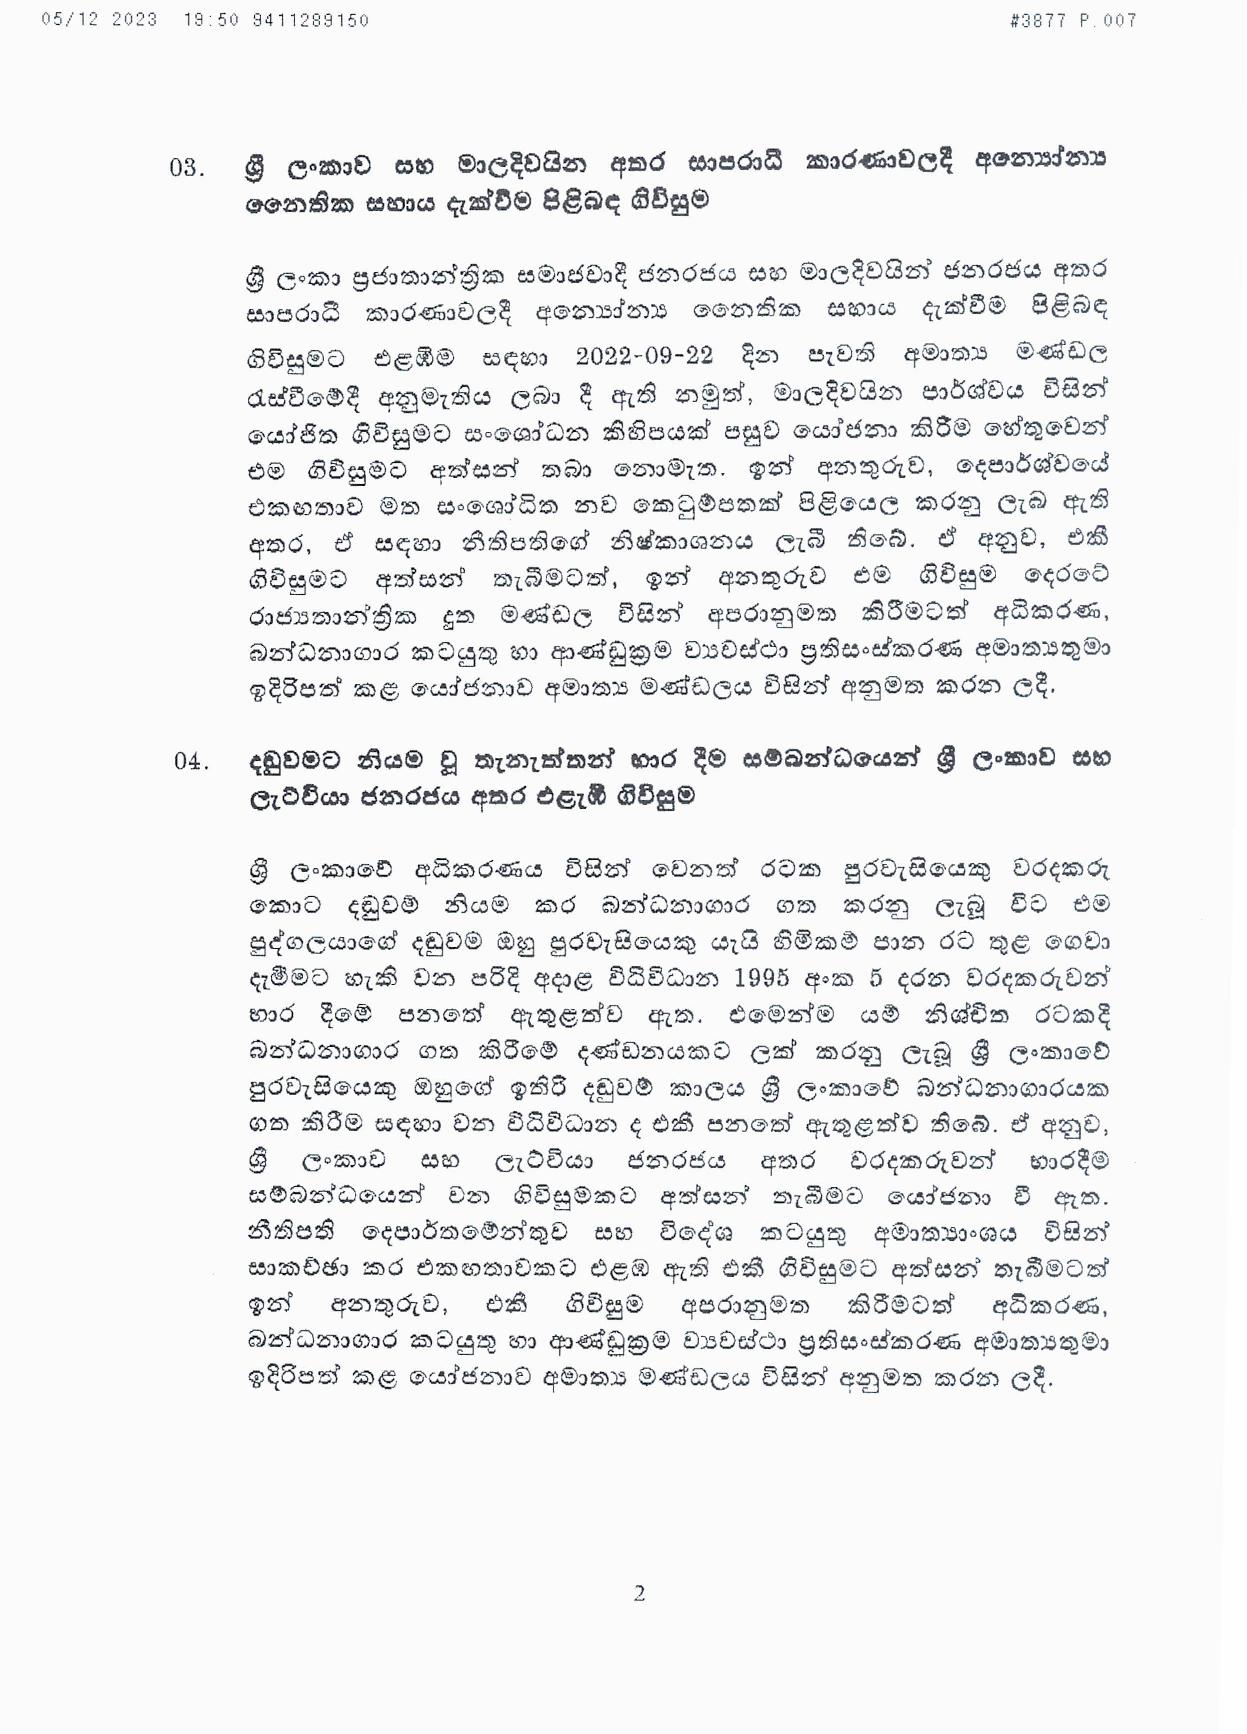 Cabinet Decision on 05.12.2023 page 002